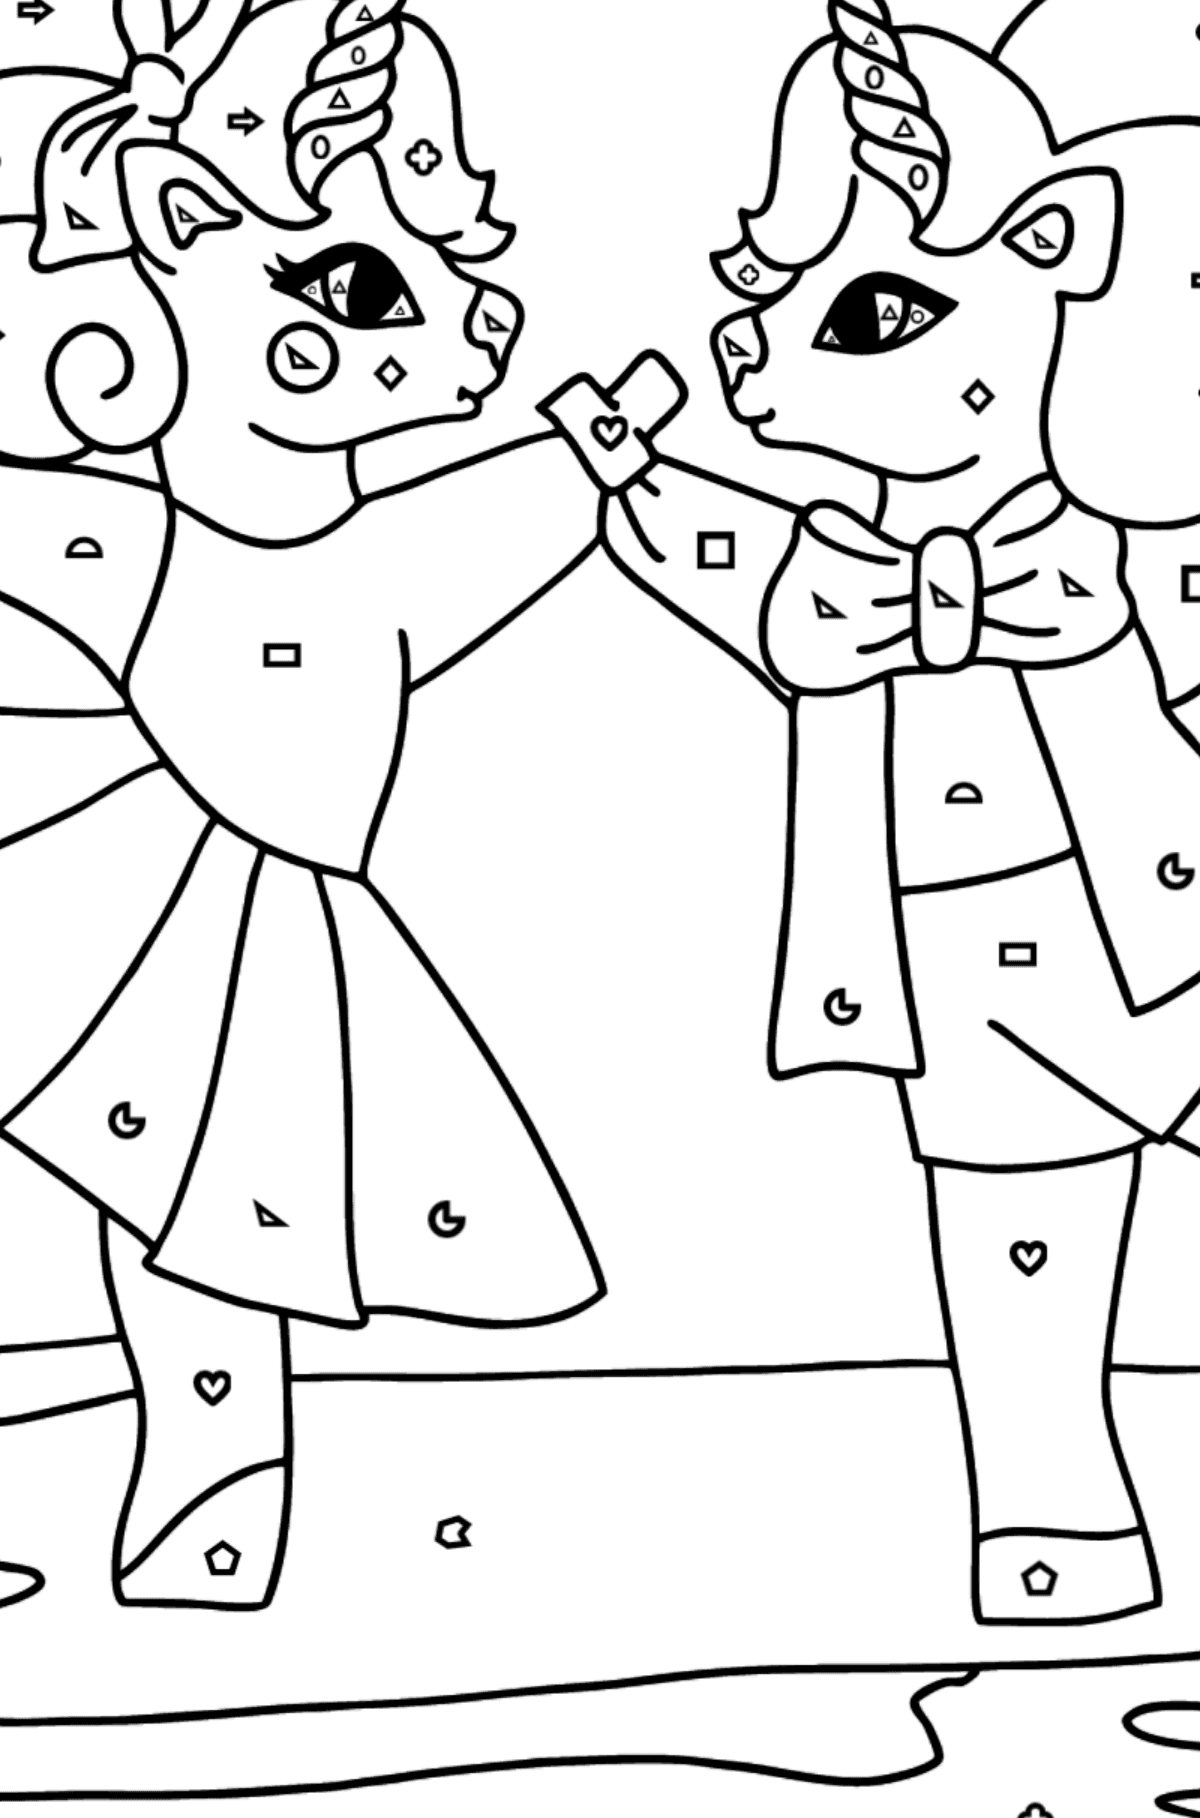 Coloring page Adorable Unicorns - Coloring by Geometric Shapes for Kids